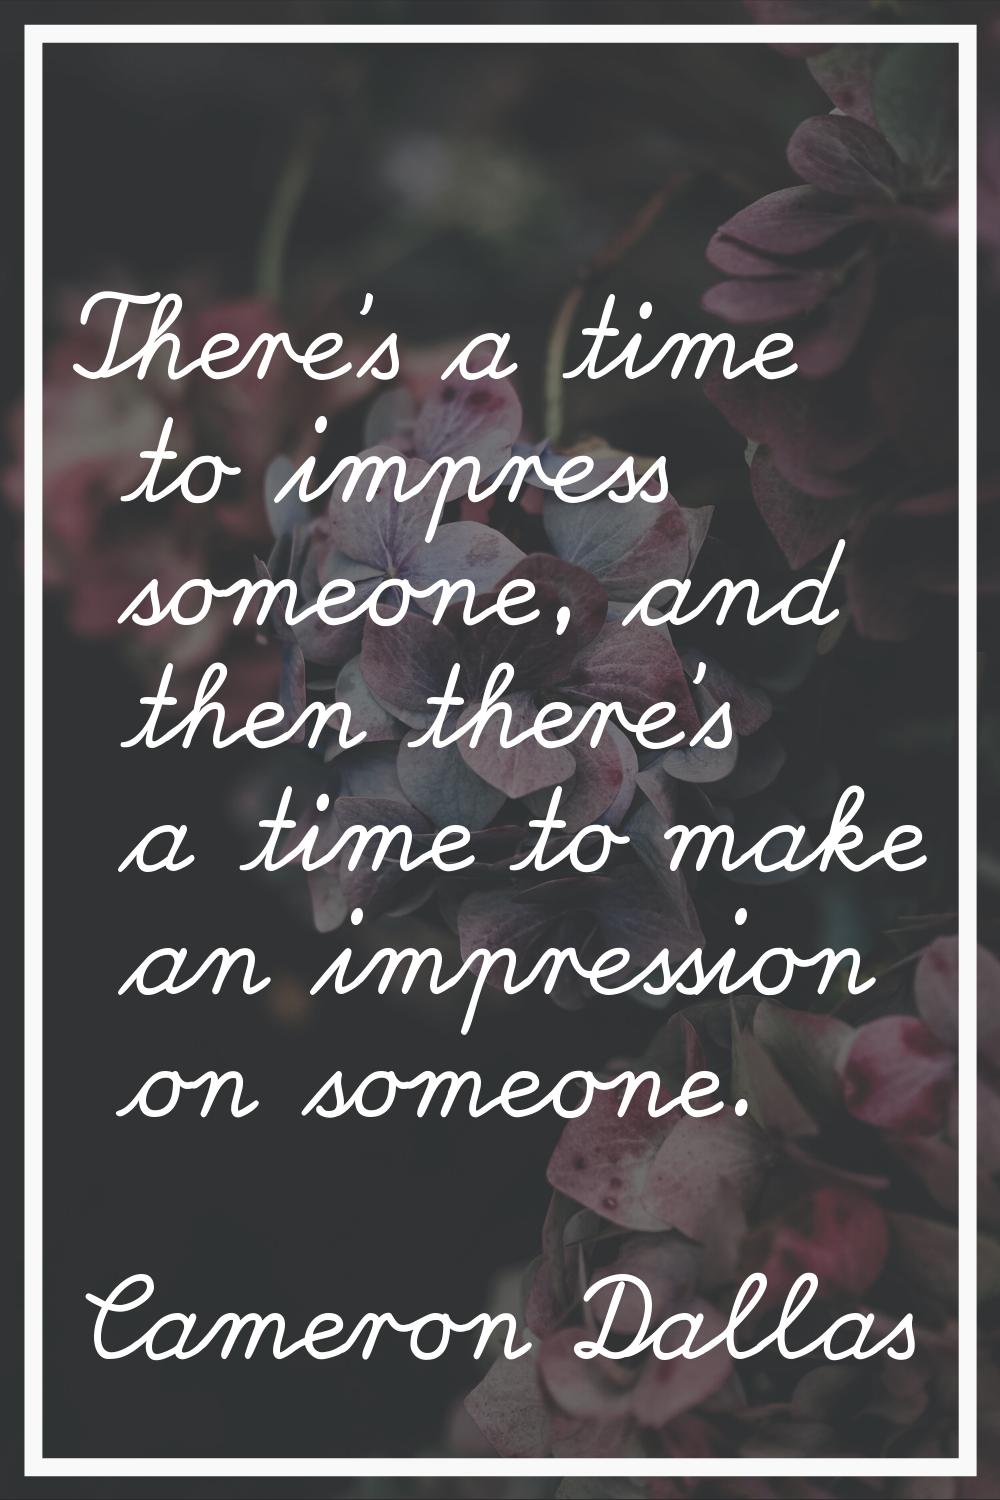 There's a time to impress someone, and then there's a time to make an impression on someone.